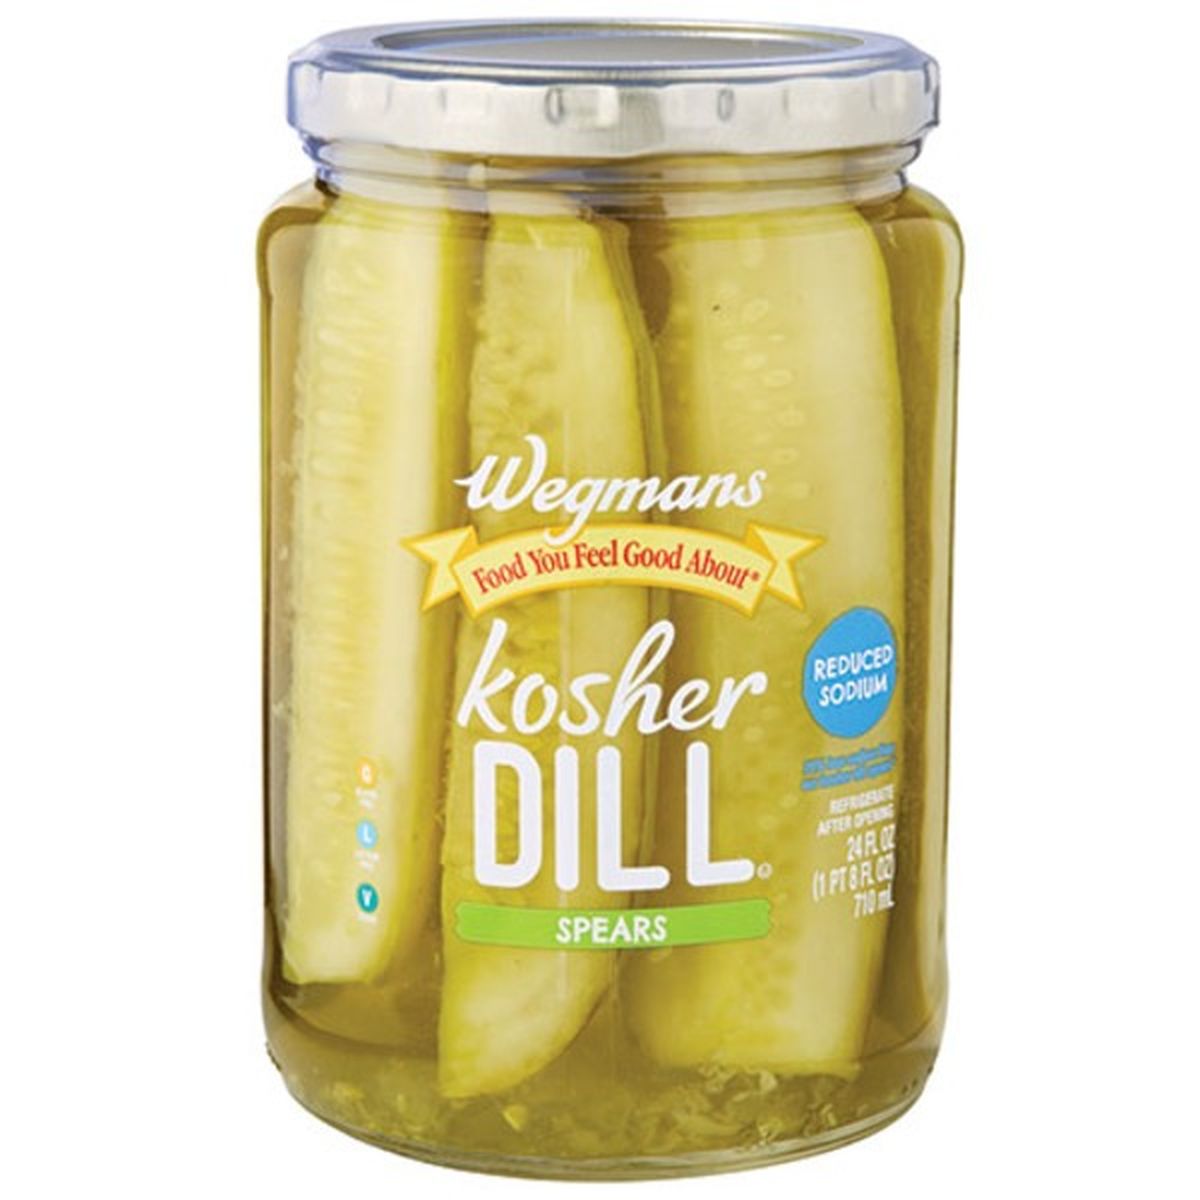 Calories in Wegmans Reduced Sodium Kosher Dill Spears